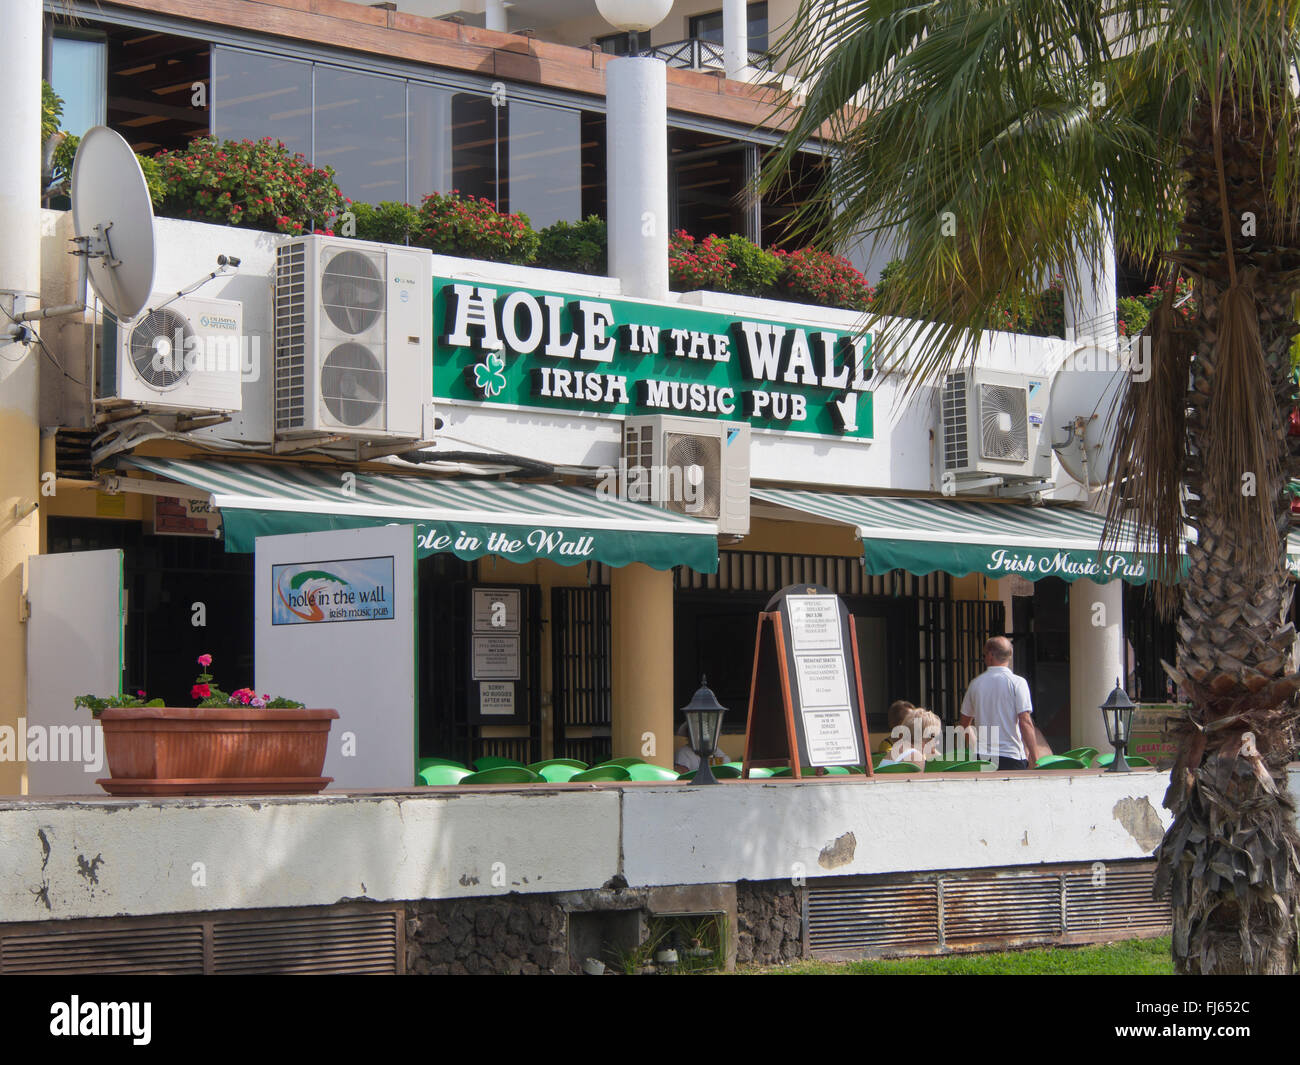 Hole in the Wall, Irish music pub in Playa las Americas Tenerife , Canary Islands Spain, refreshments and tourist entertainment Stock Photo